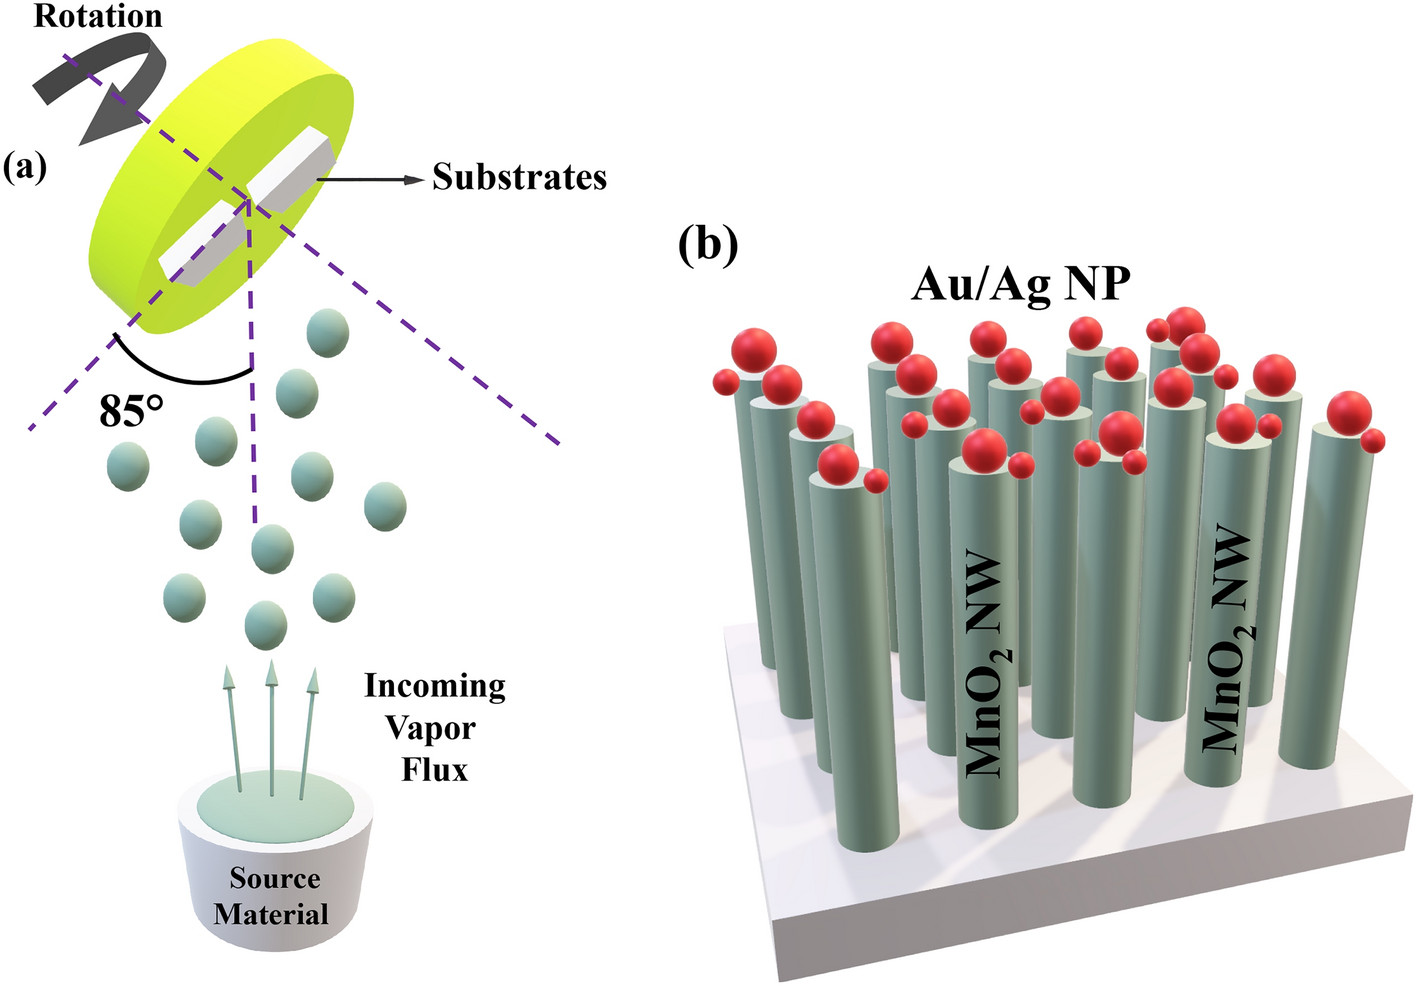 Surface functionalization of MnO2 NW embellished with metal nanoparticles for self-cleaning applications